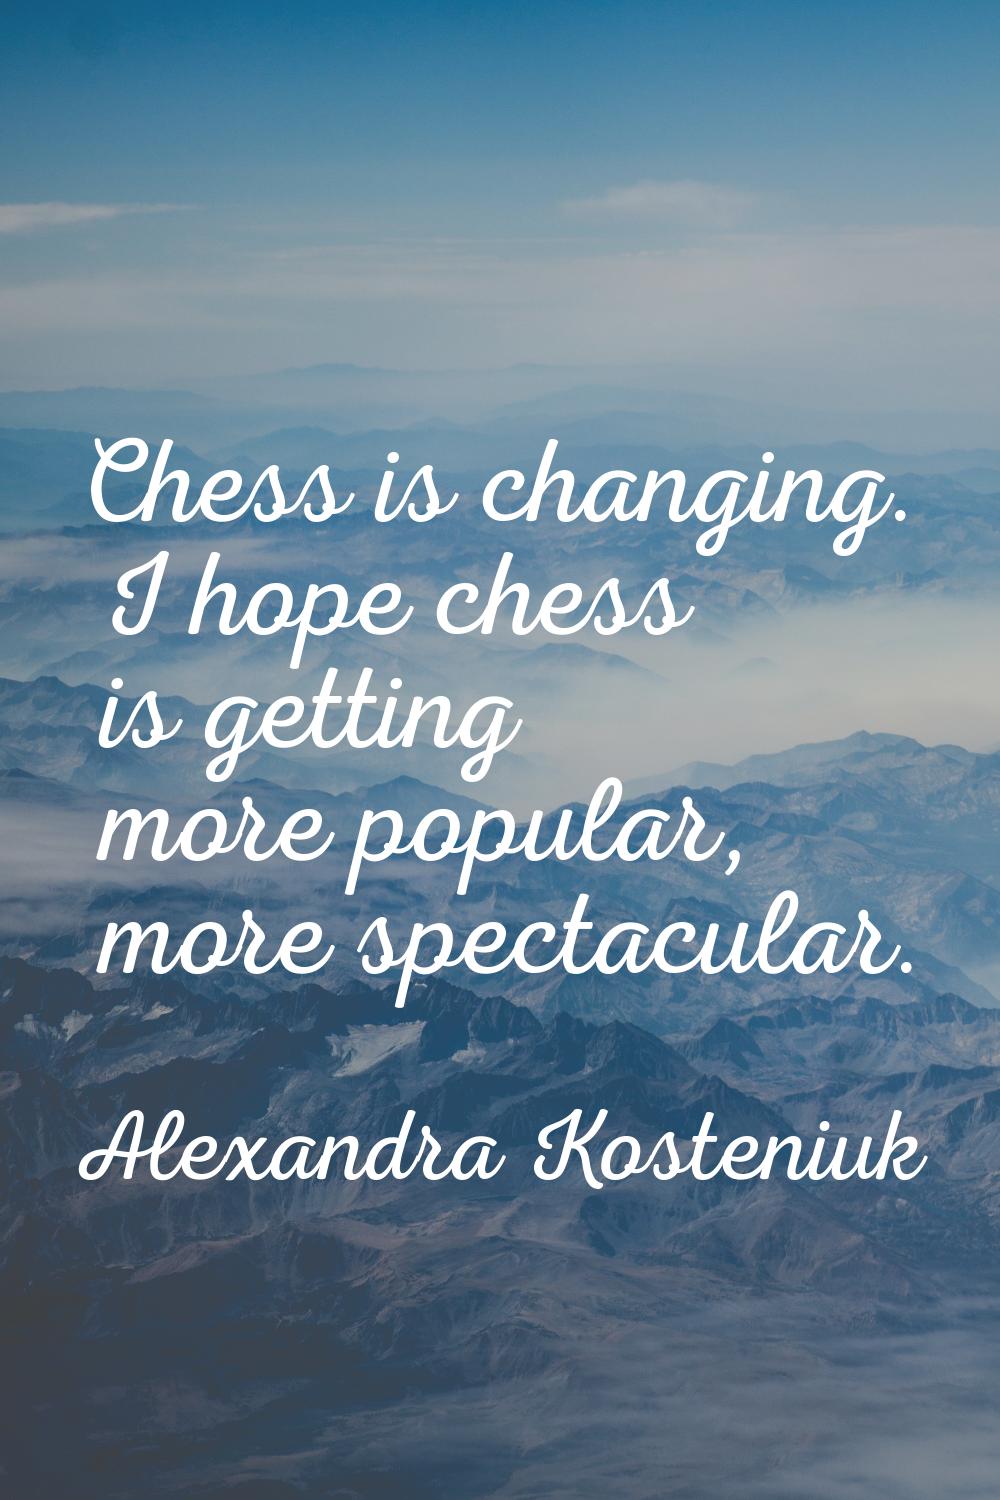 Chess is changing. I hope chess is getting more popular, more spectacular.